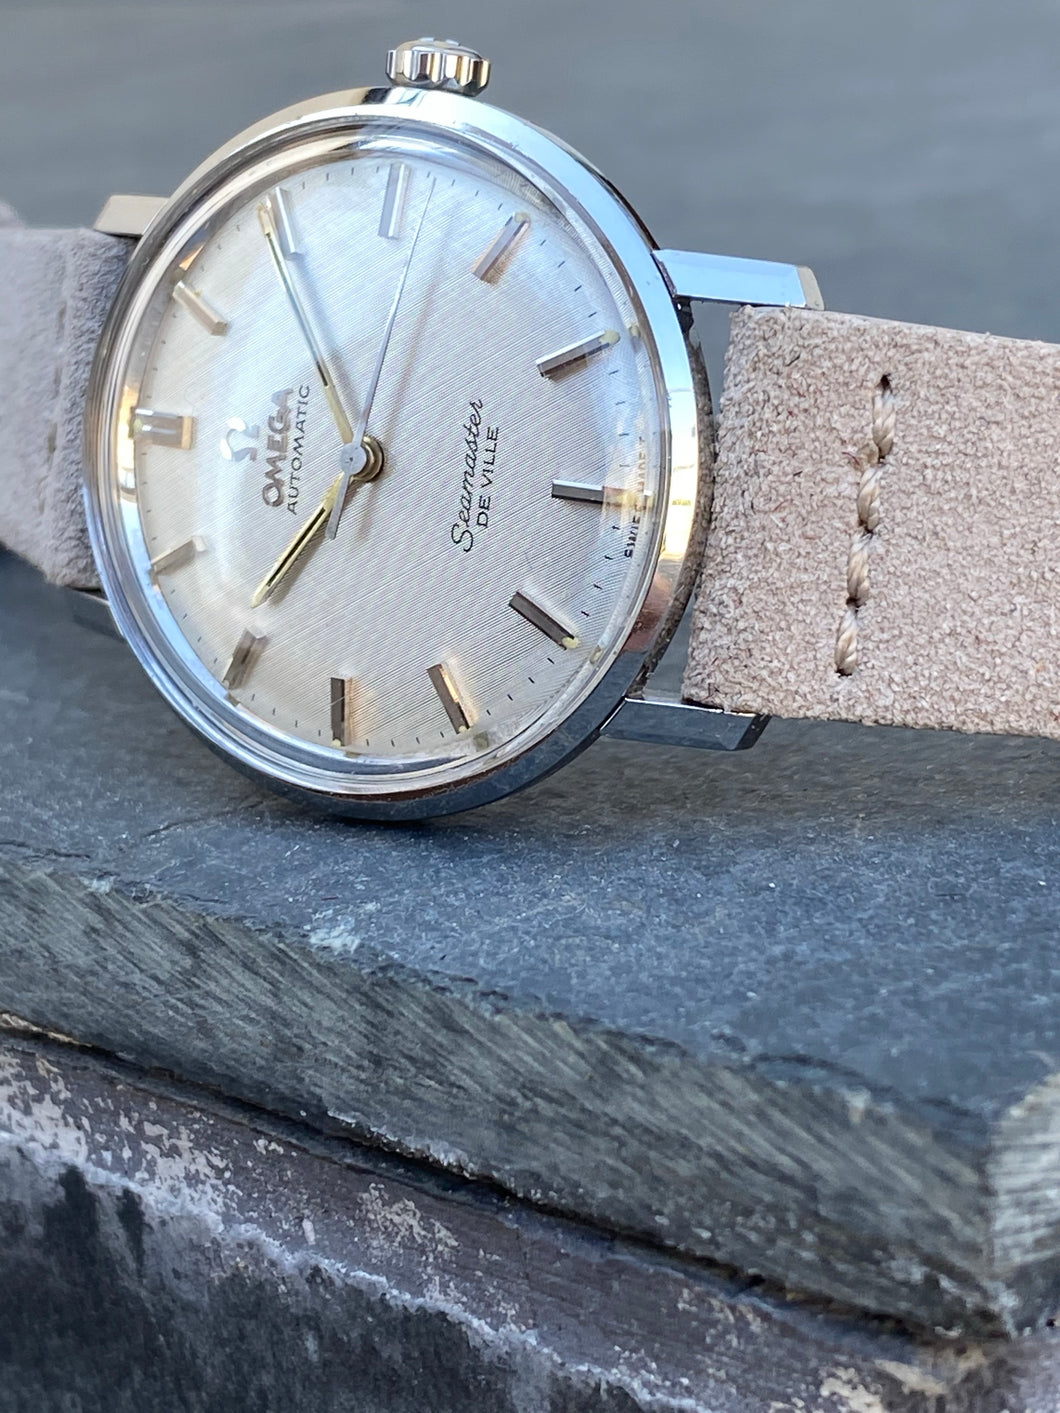 1962 Omega Automatic Seamaster De Ville with linen dial *SERVICED*